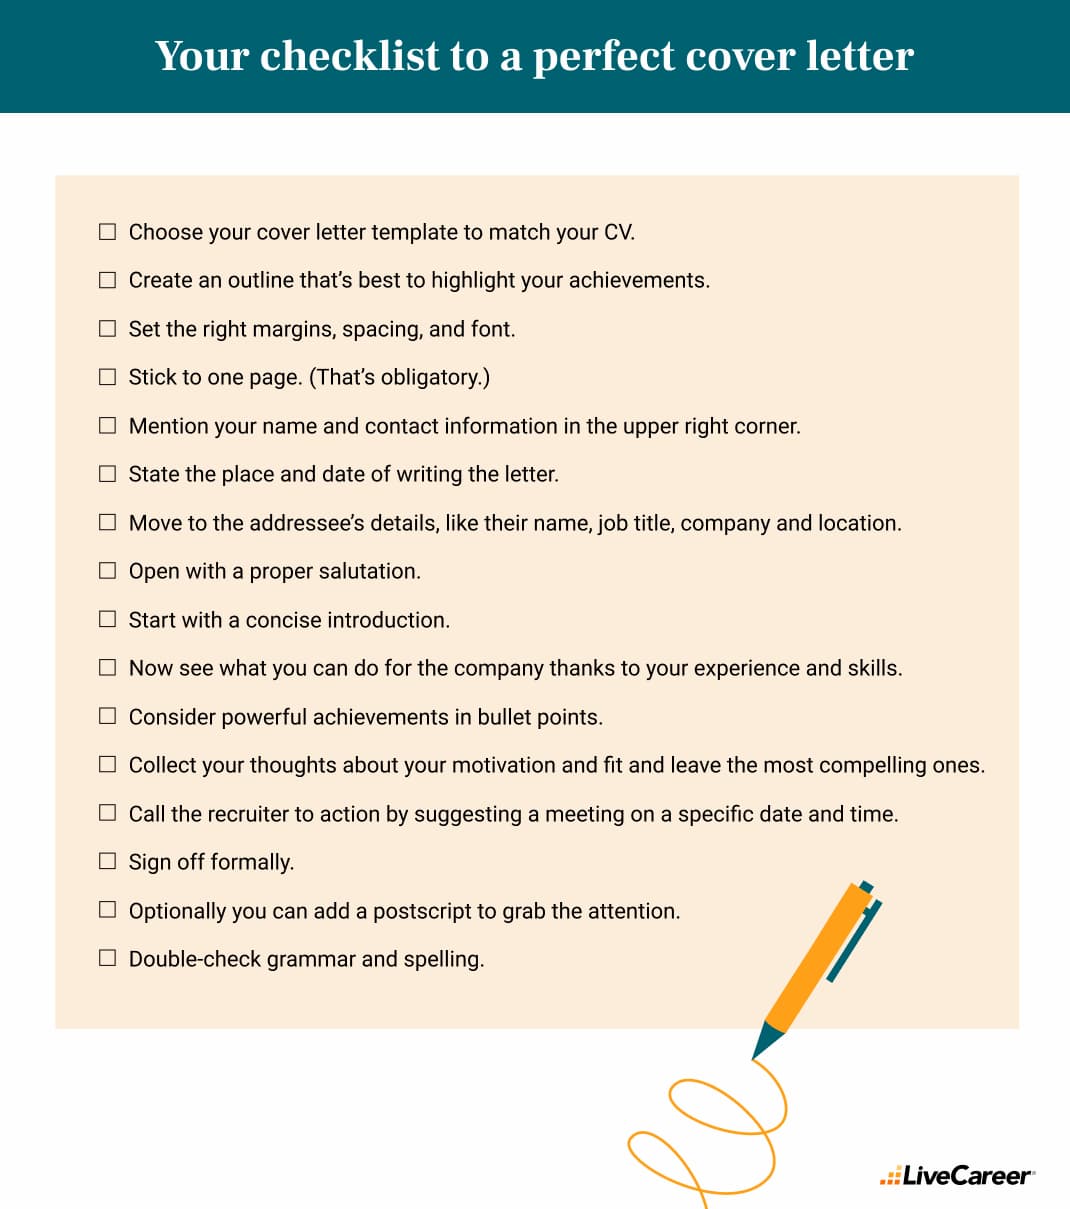 checklist for writing the perfect cover letter